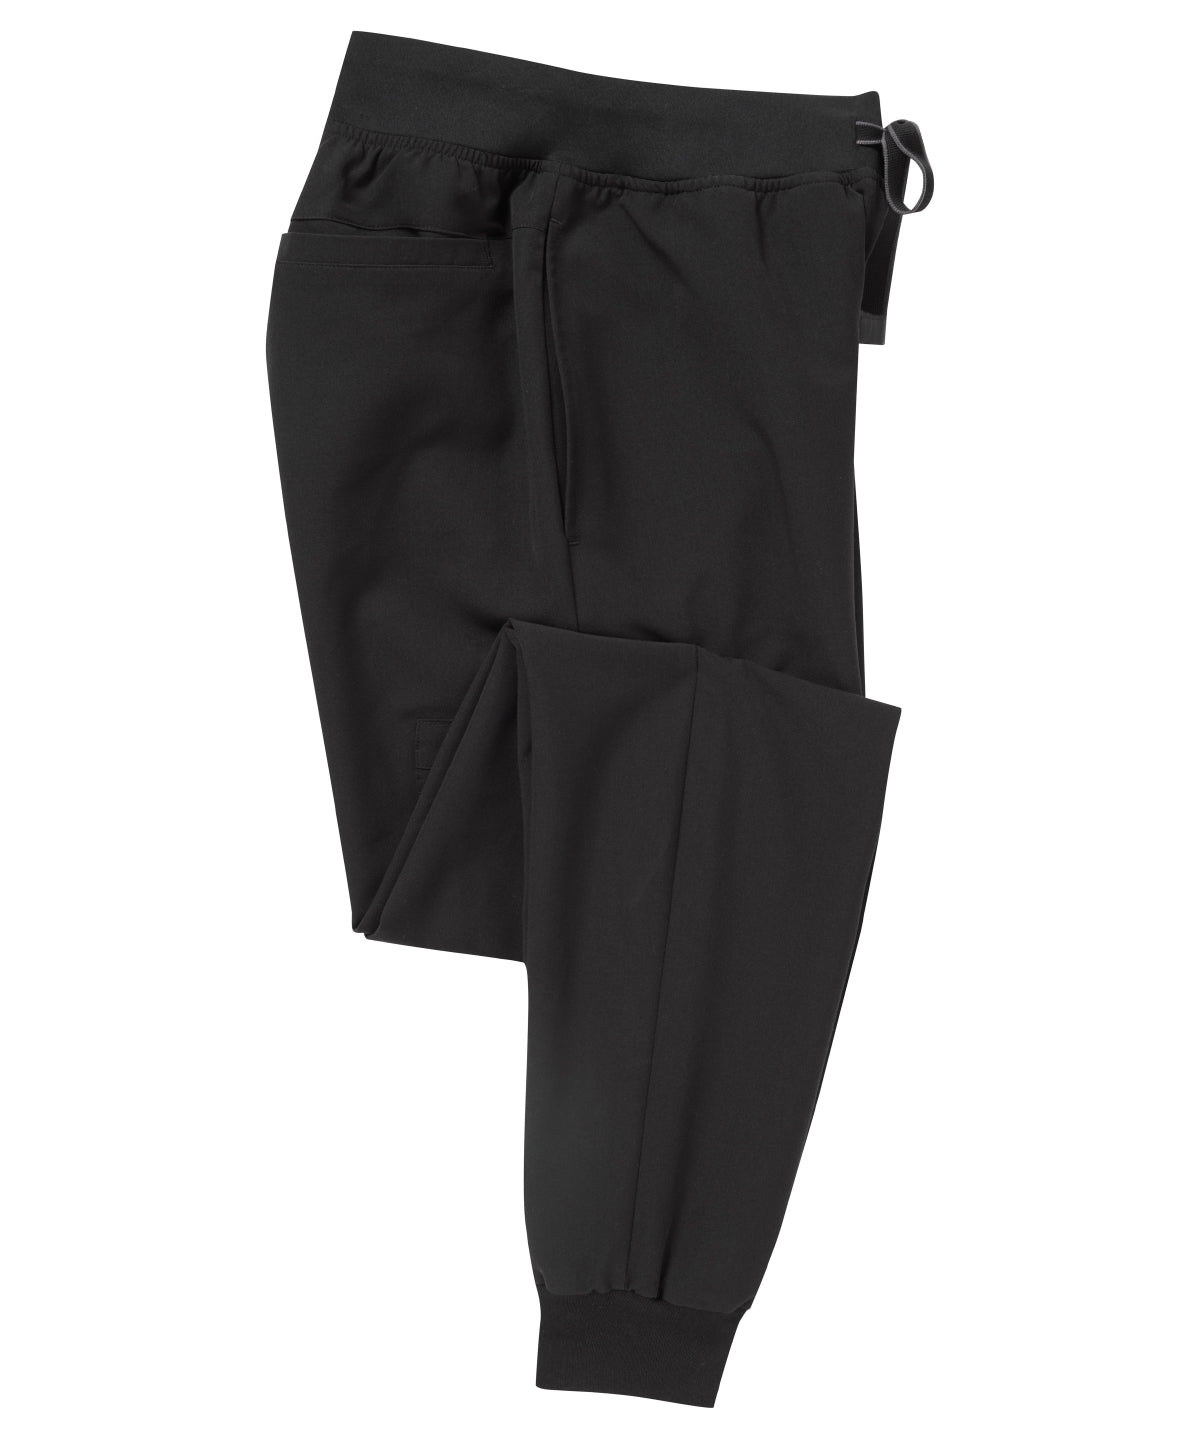 Onna by Premier Women’s 'Energized' Onna-stretch jogger pants